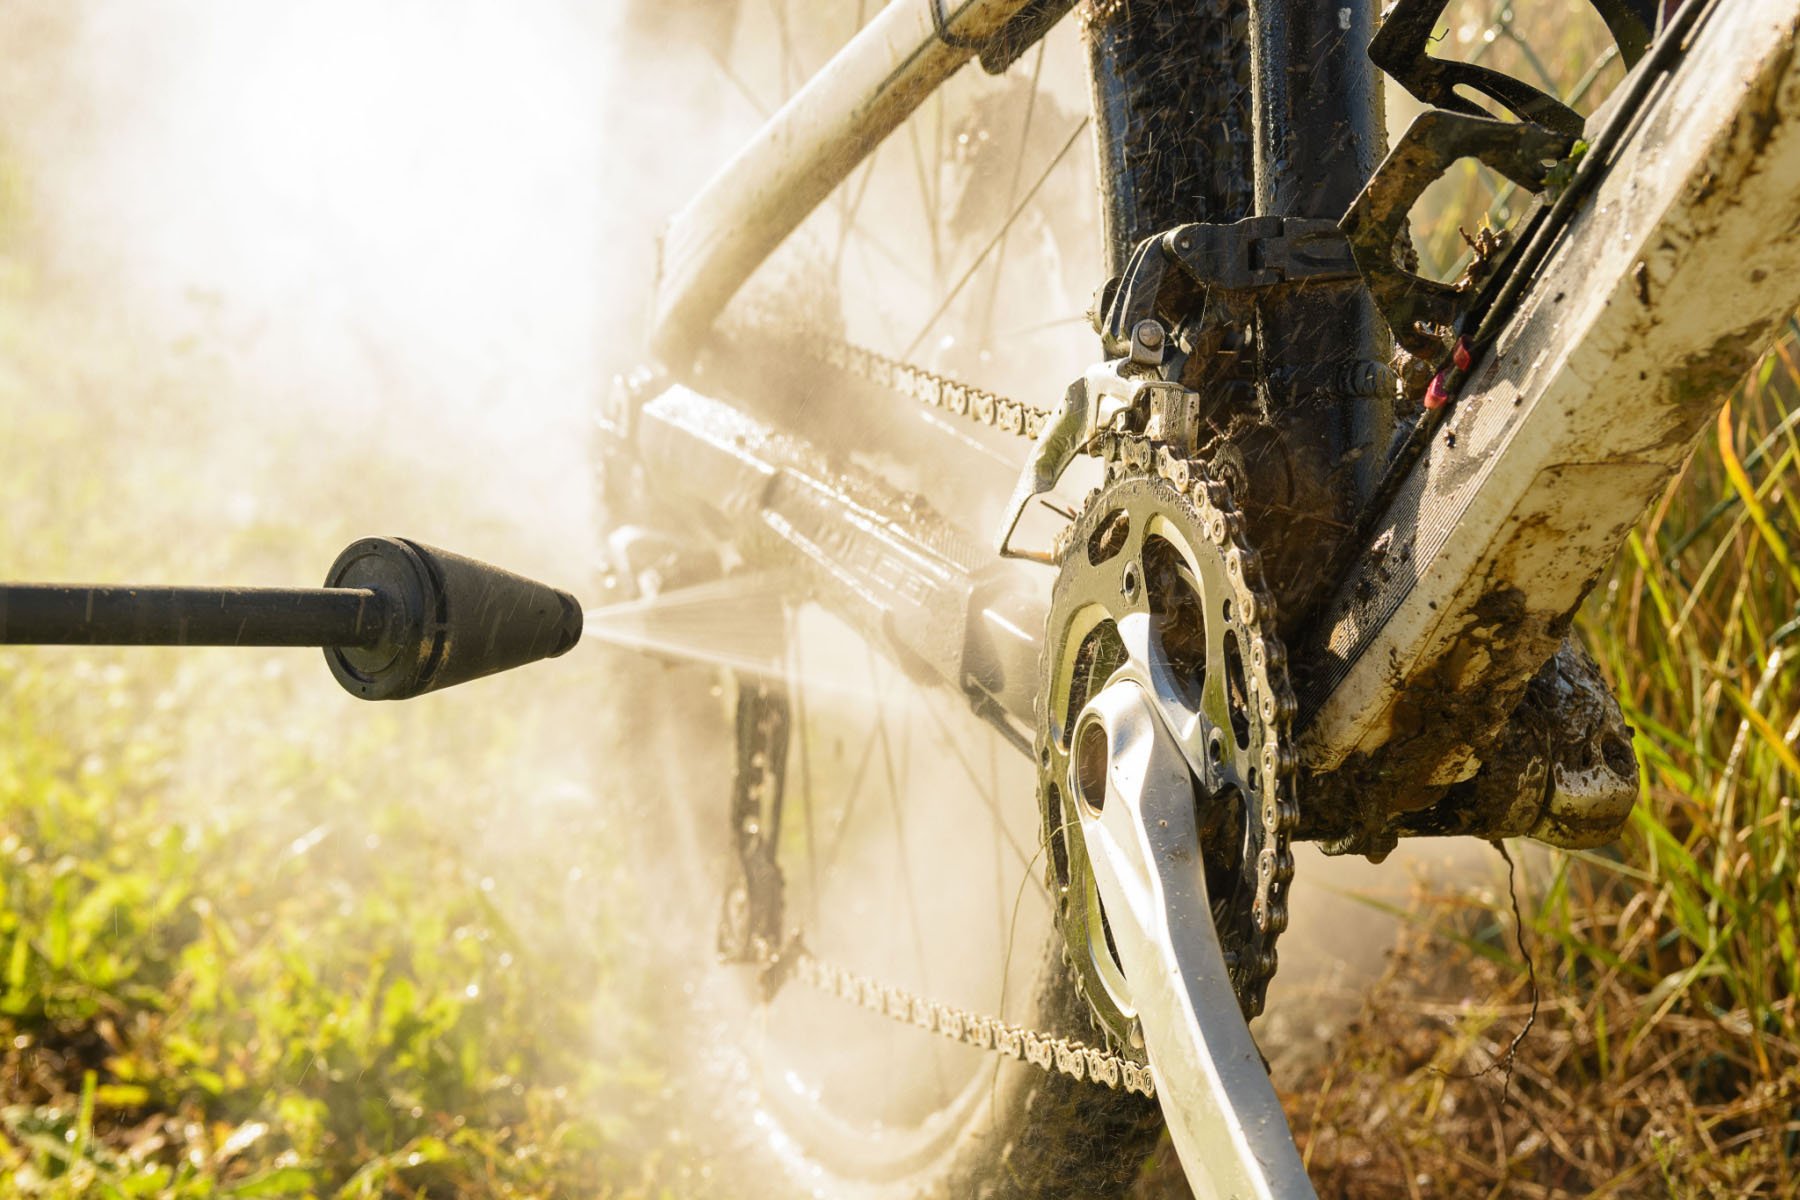 Cleaning a muddy mountain bike with spraying water